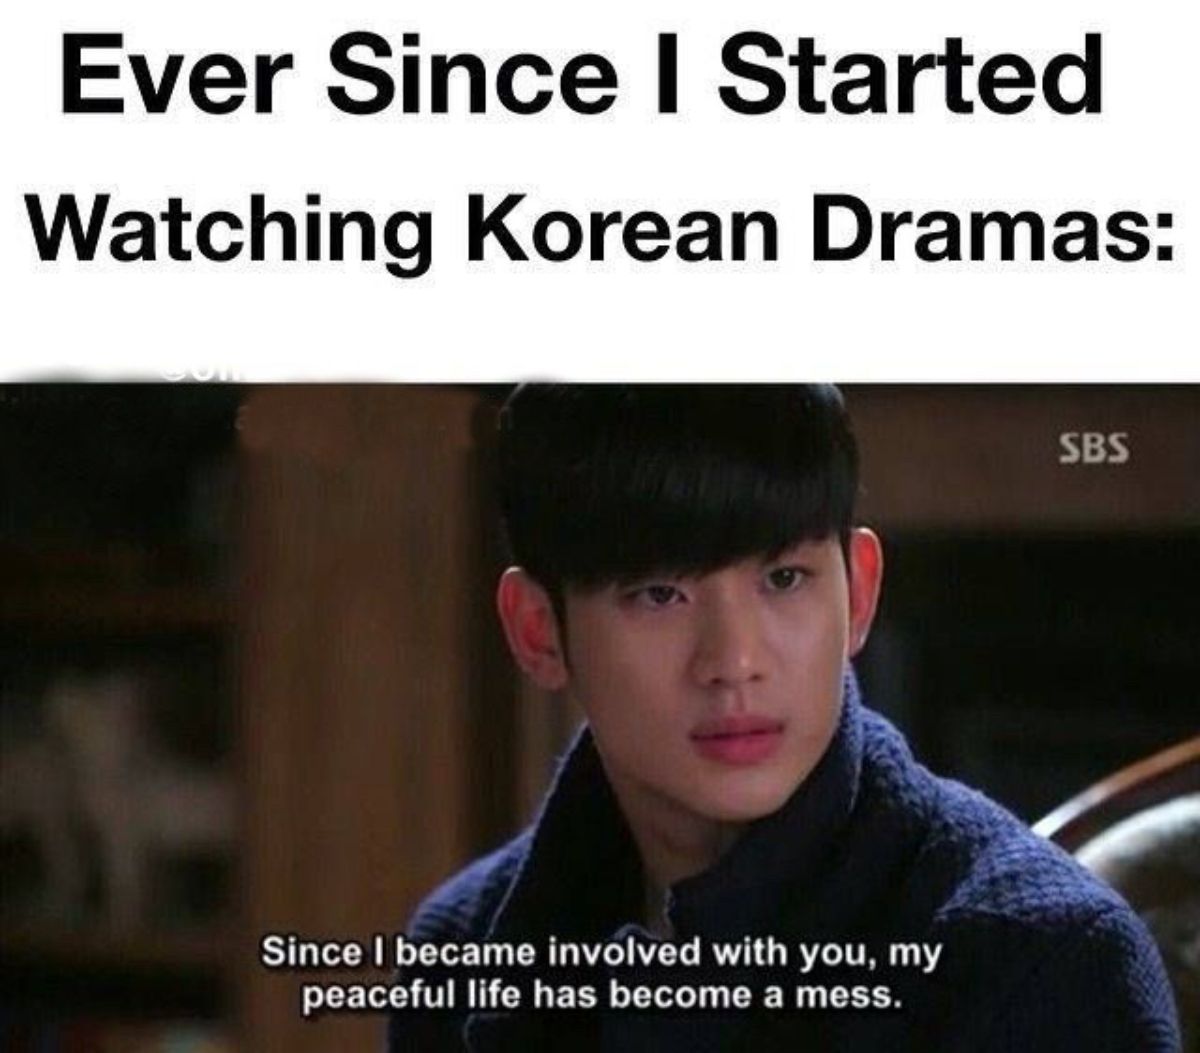 10 Hilarious KDrama Memes Only Fans Will Understand